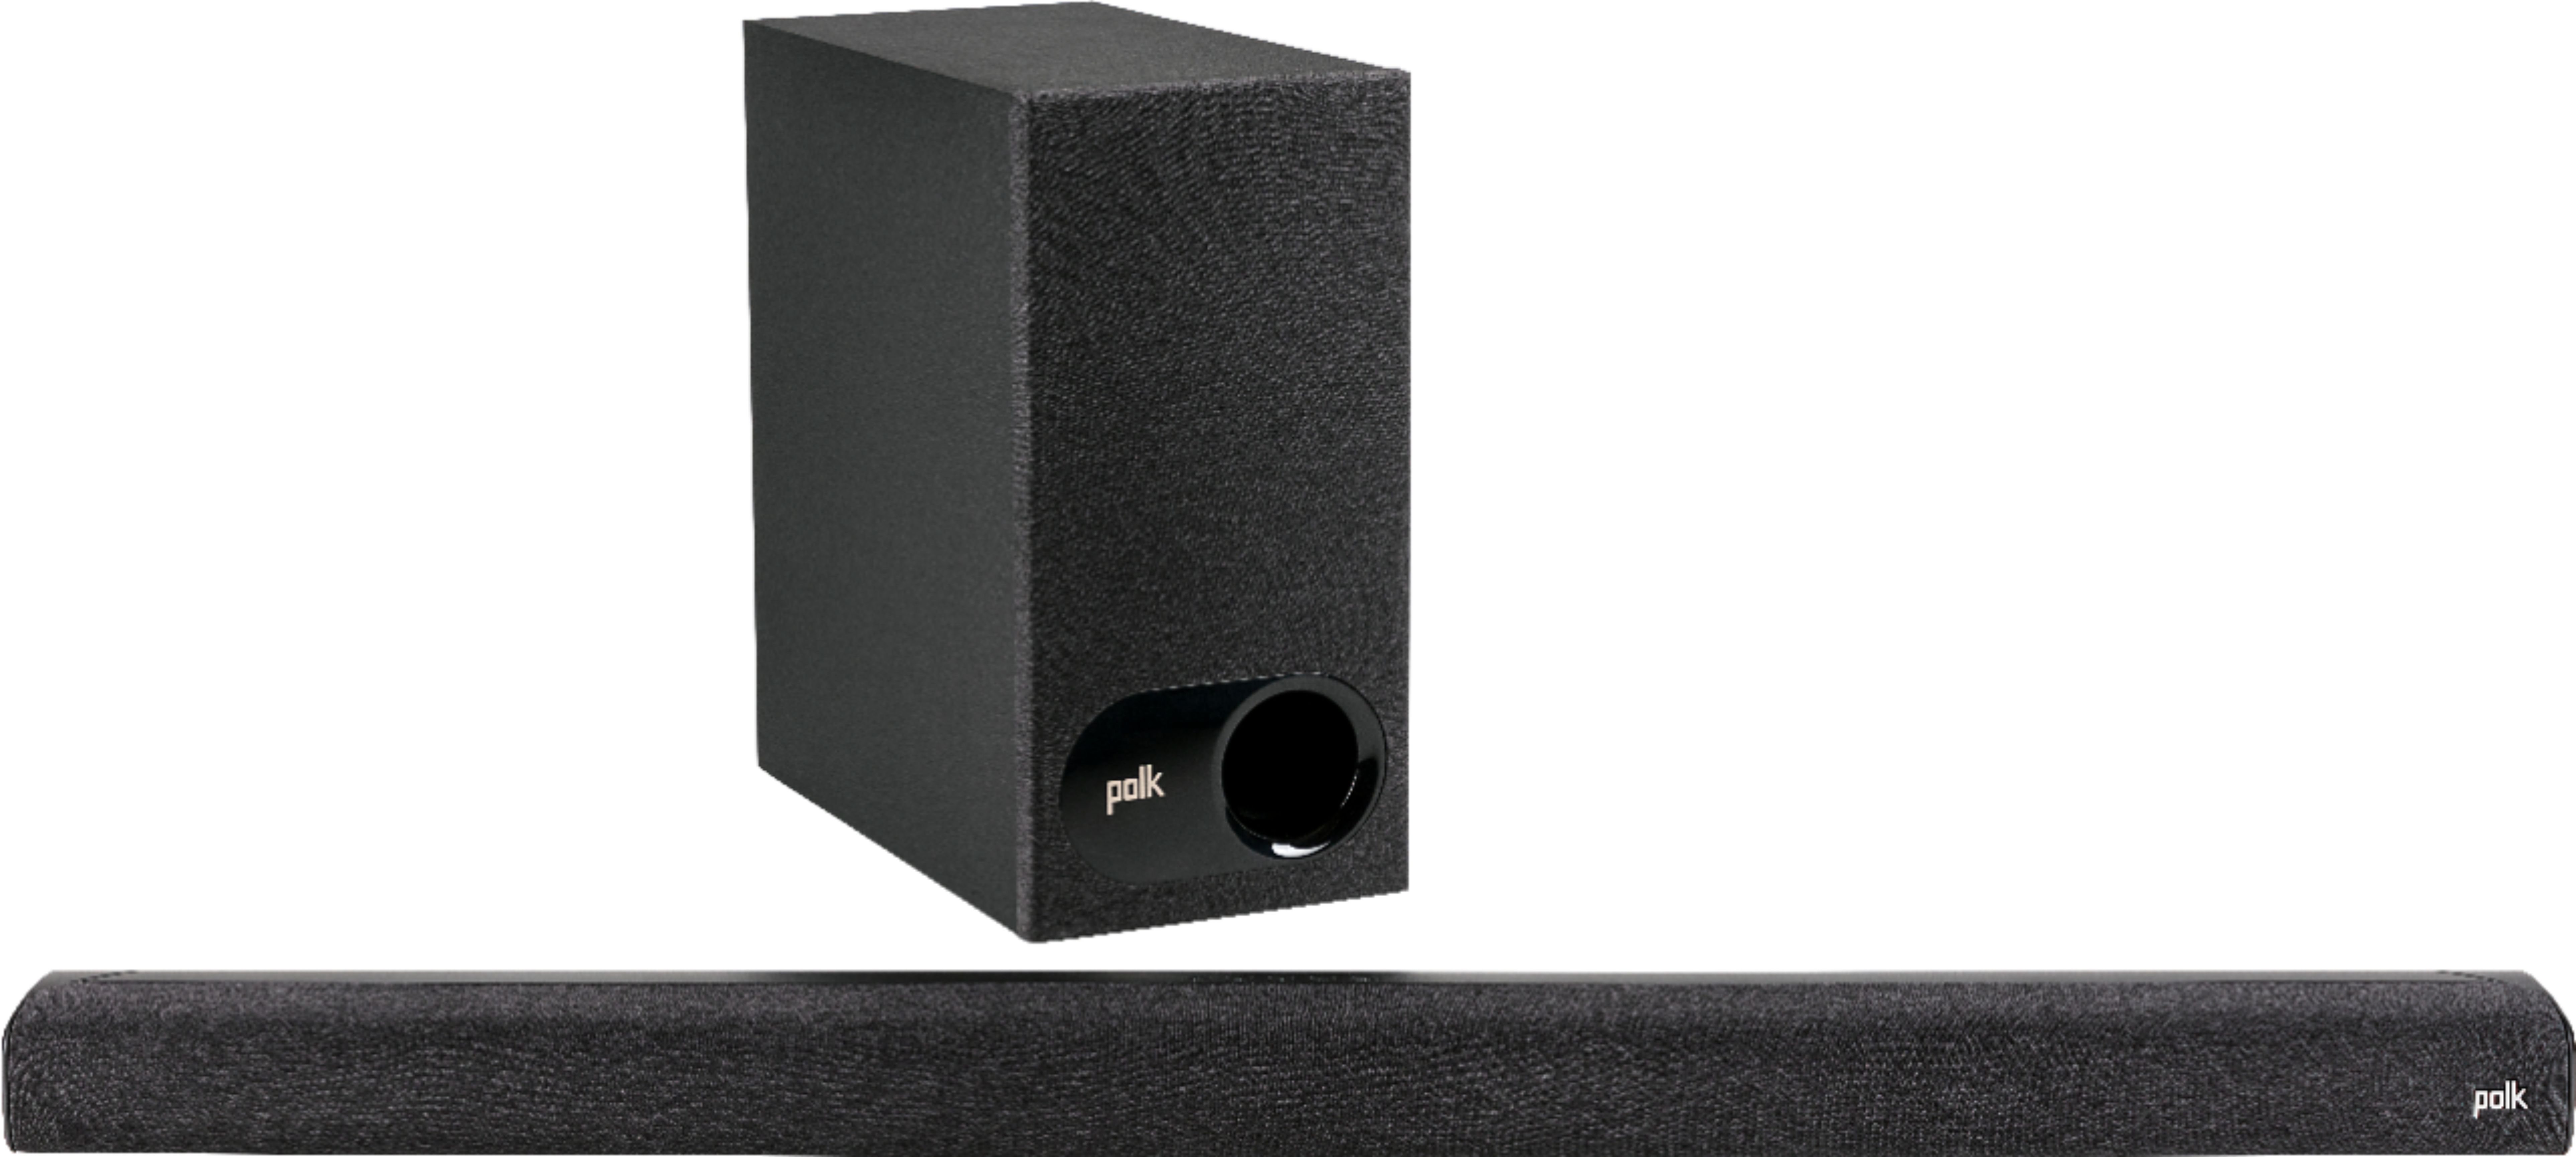 Angle View: Polk Audio - 2.1-Channel Signa S3 Ultra-Slim Soundbar with Wireless Subwoofer and Dolby Digital - Black